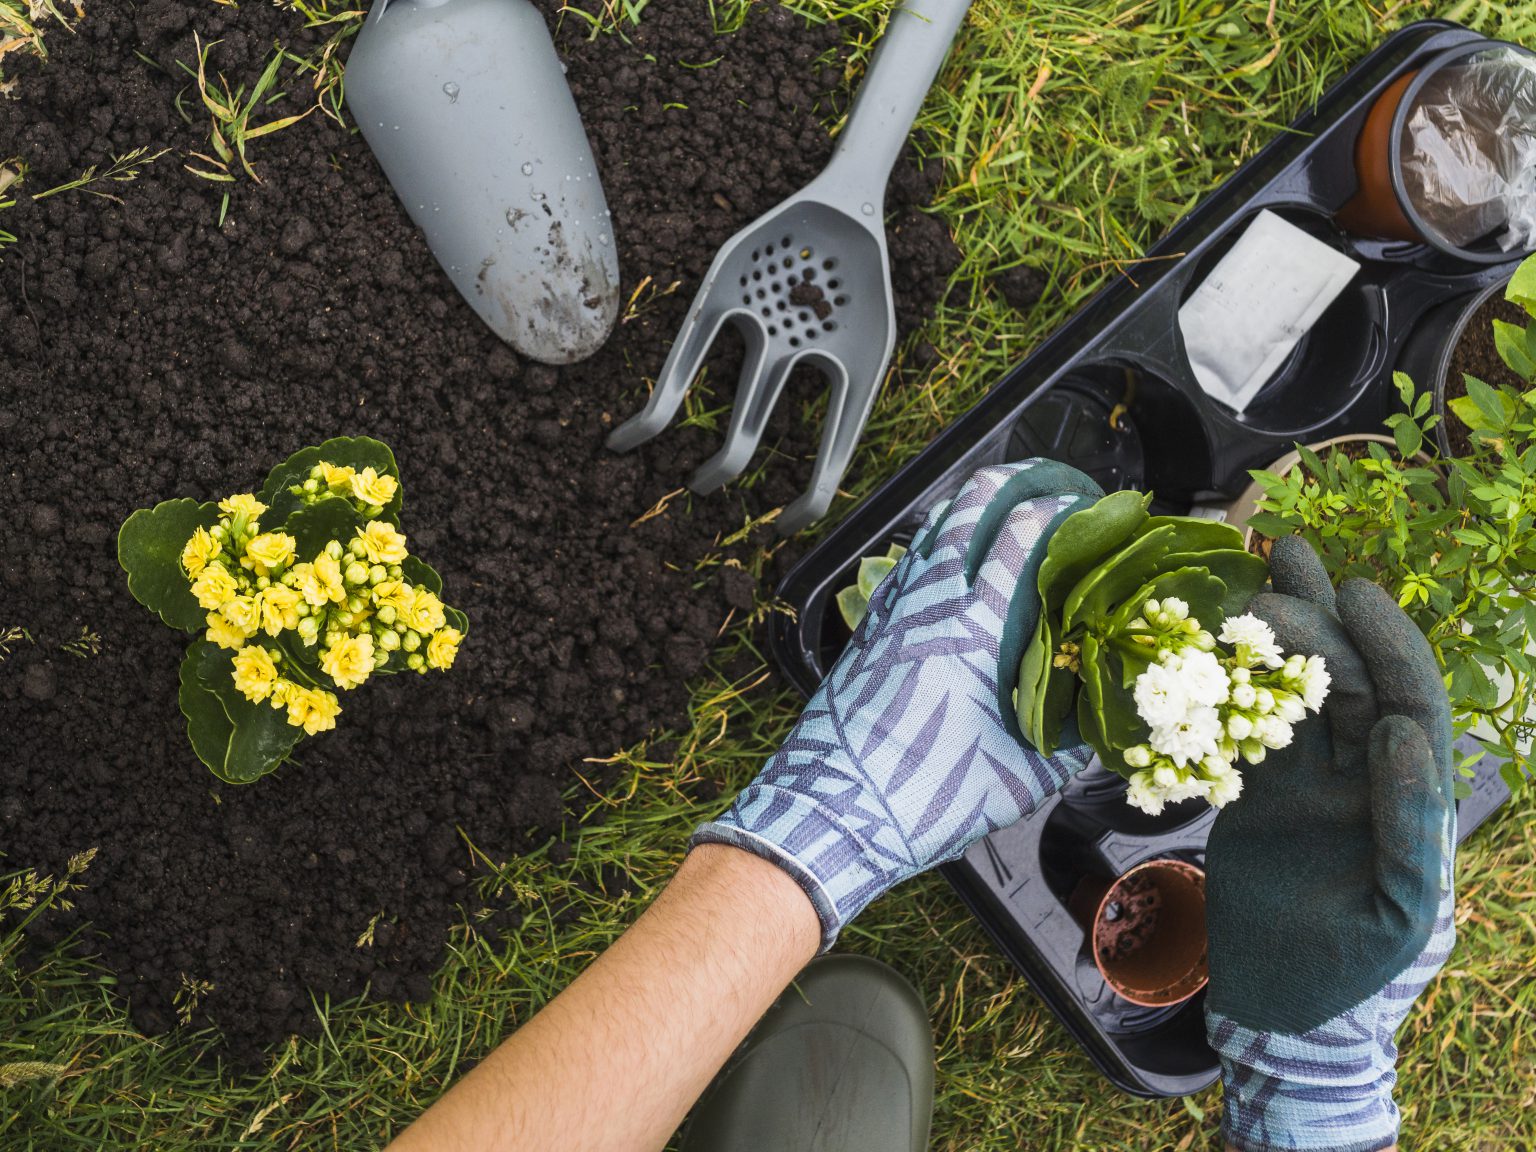 Planting flowers, shrubs, and trees